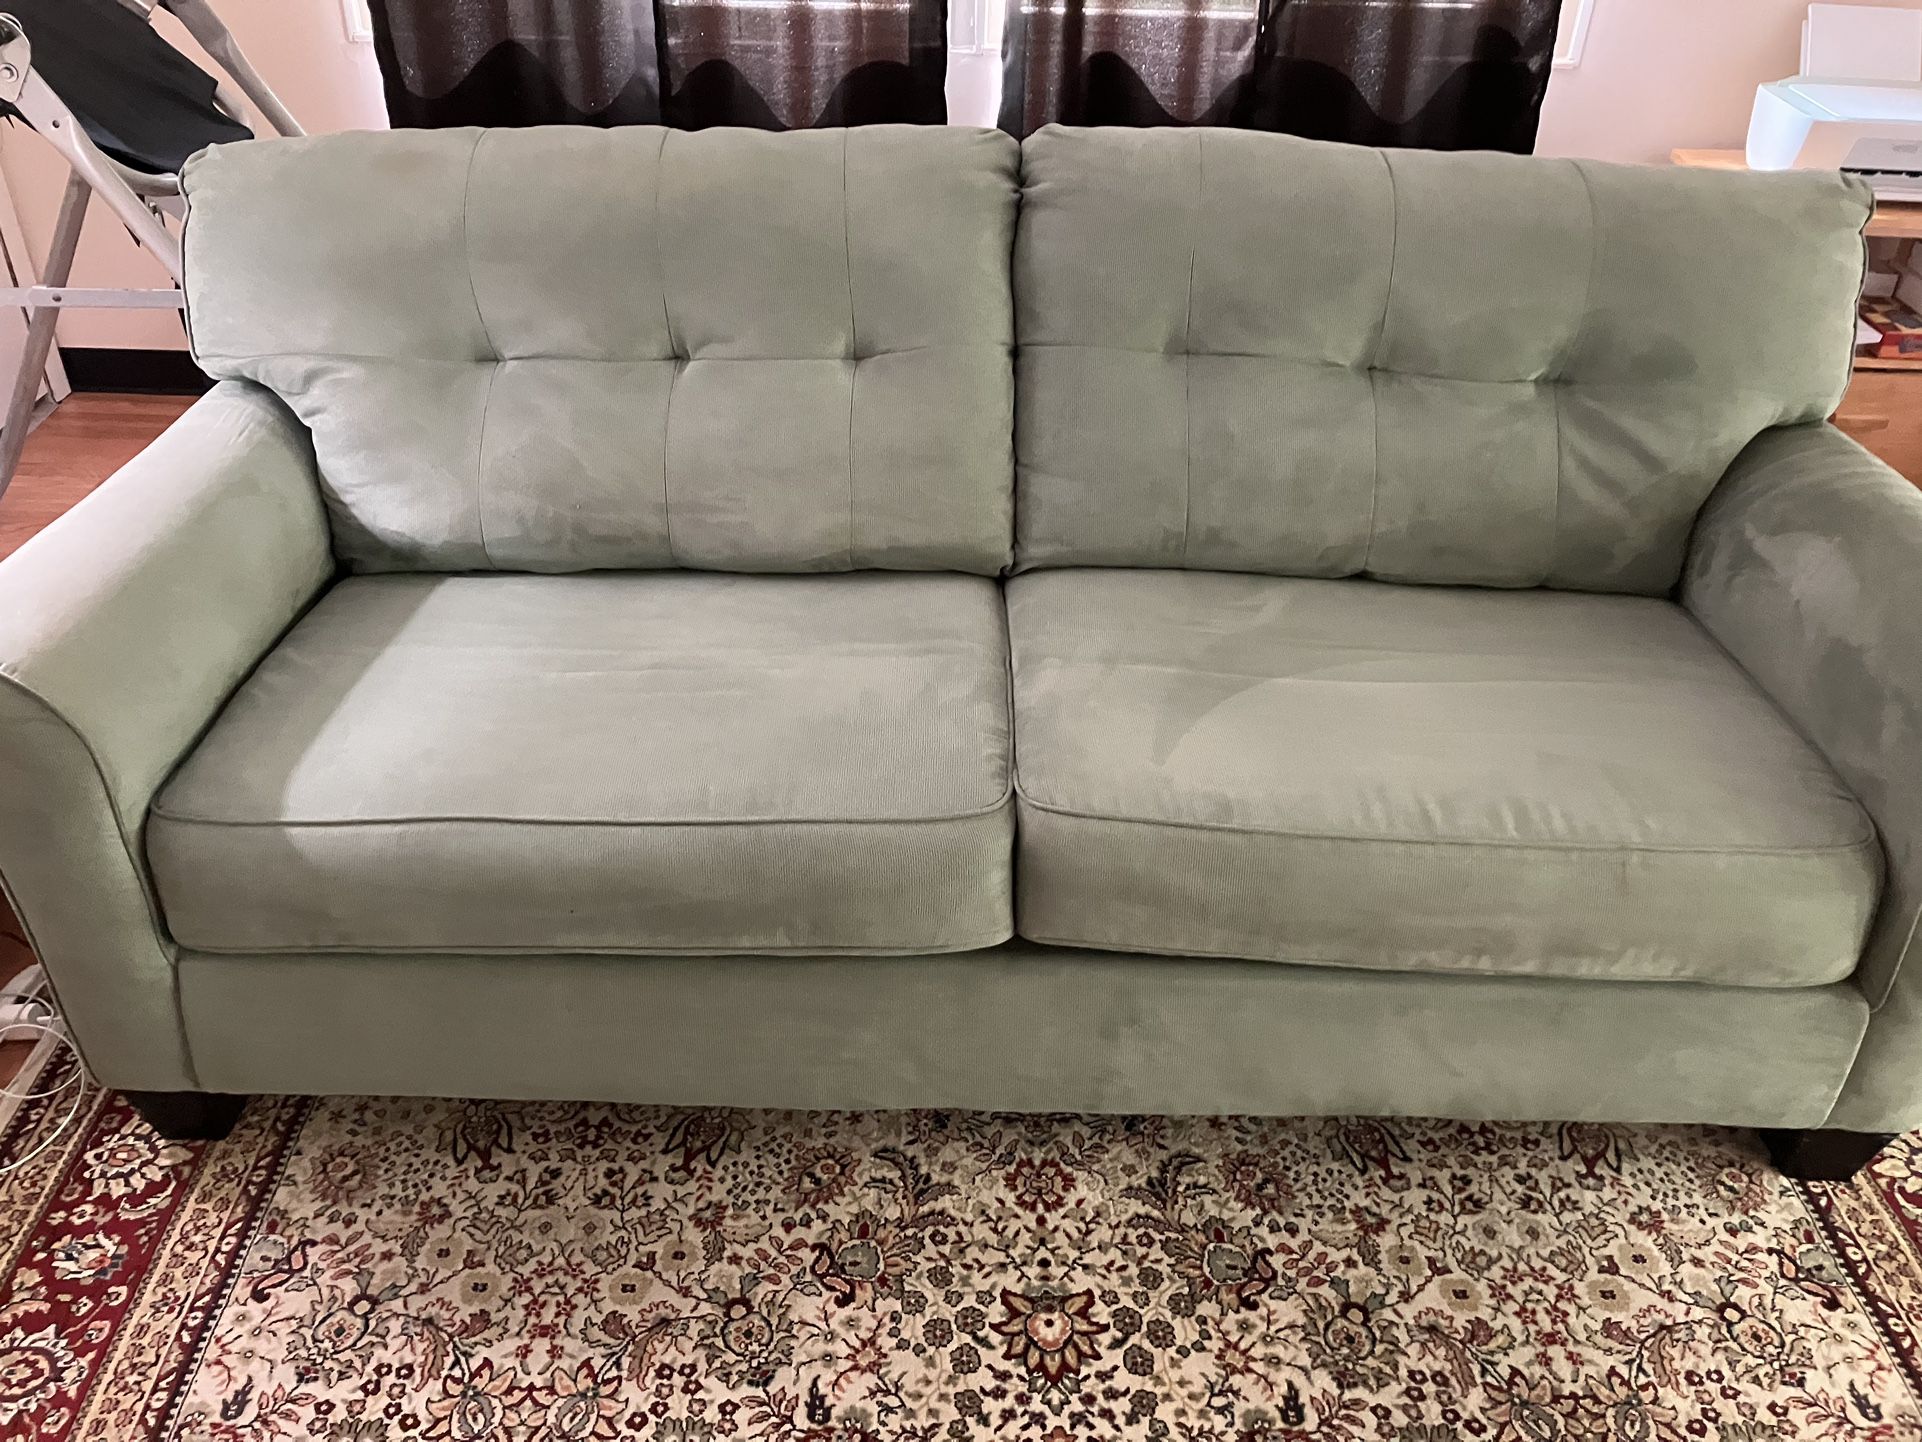 Sofa By Ashley Great Deal!